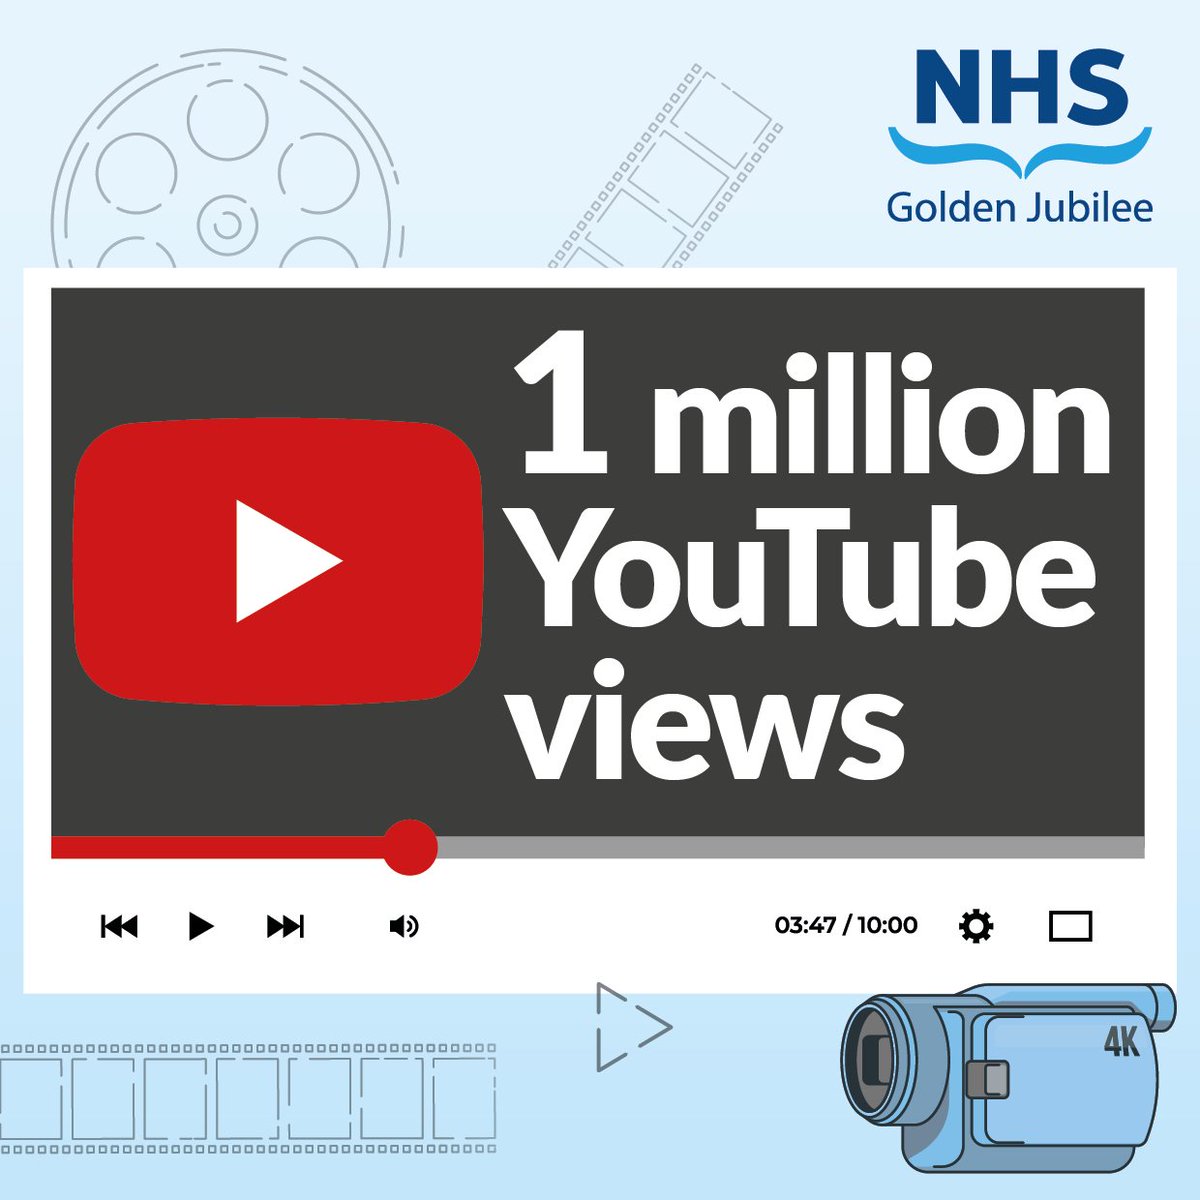 Wow Our YouTube channel has had over 1 million views. It's full of videos on patient information, advice, patient stories and journeys and achievements. Check us out: youtube.com/channel/UCsrJa… #ThankYou for watching ❤️😍